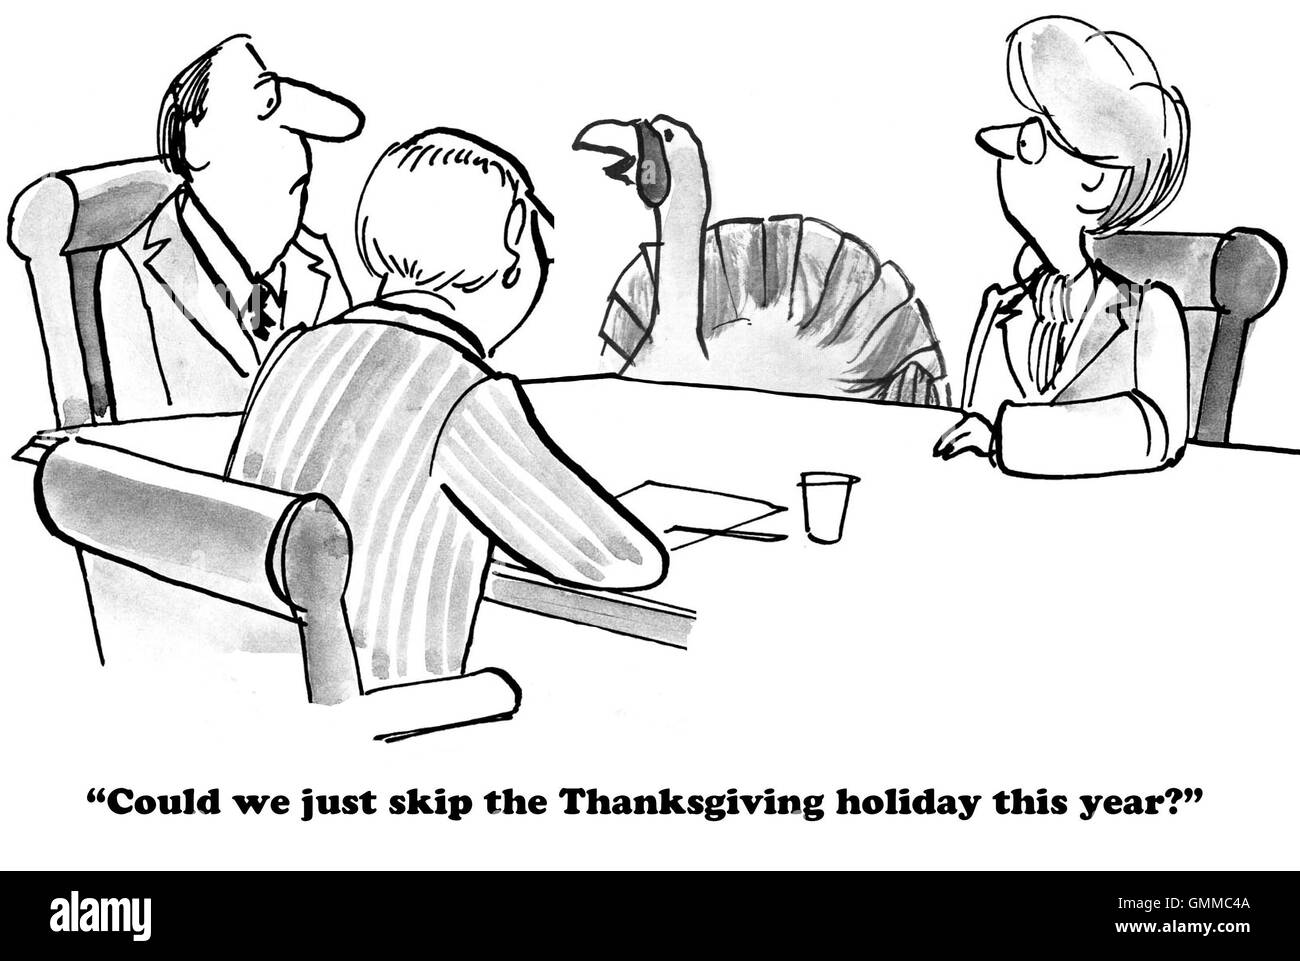 Thanksgiving cartoon about a turkey who wants to skip the Thanksgiving holiday this year. Stock Photo